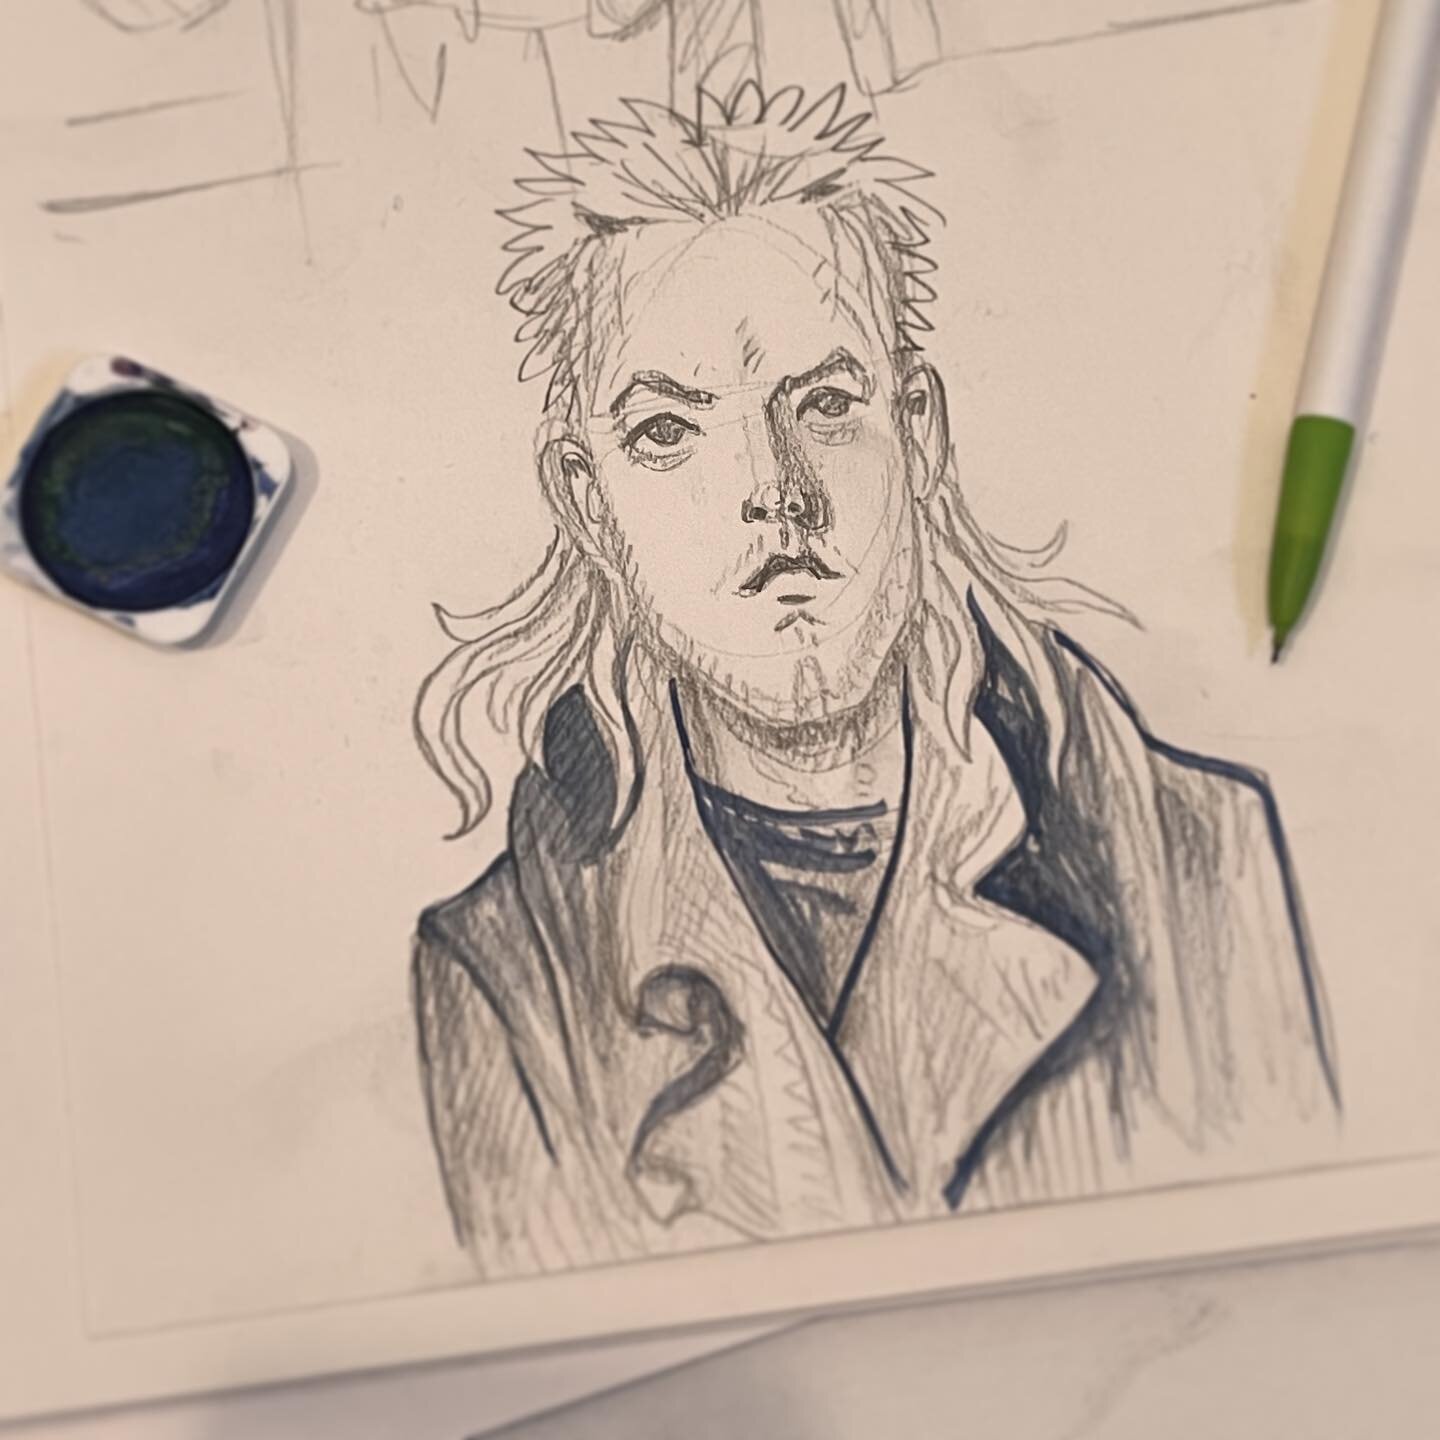 Working on a Lost Boys piece for my buddy Mikey!